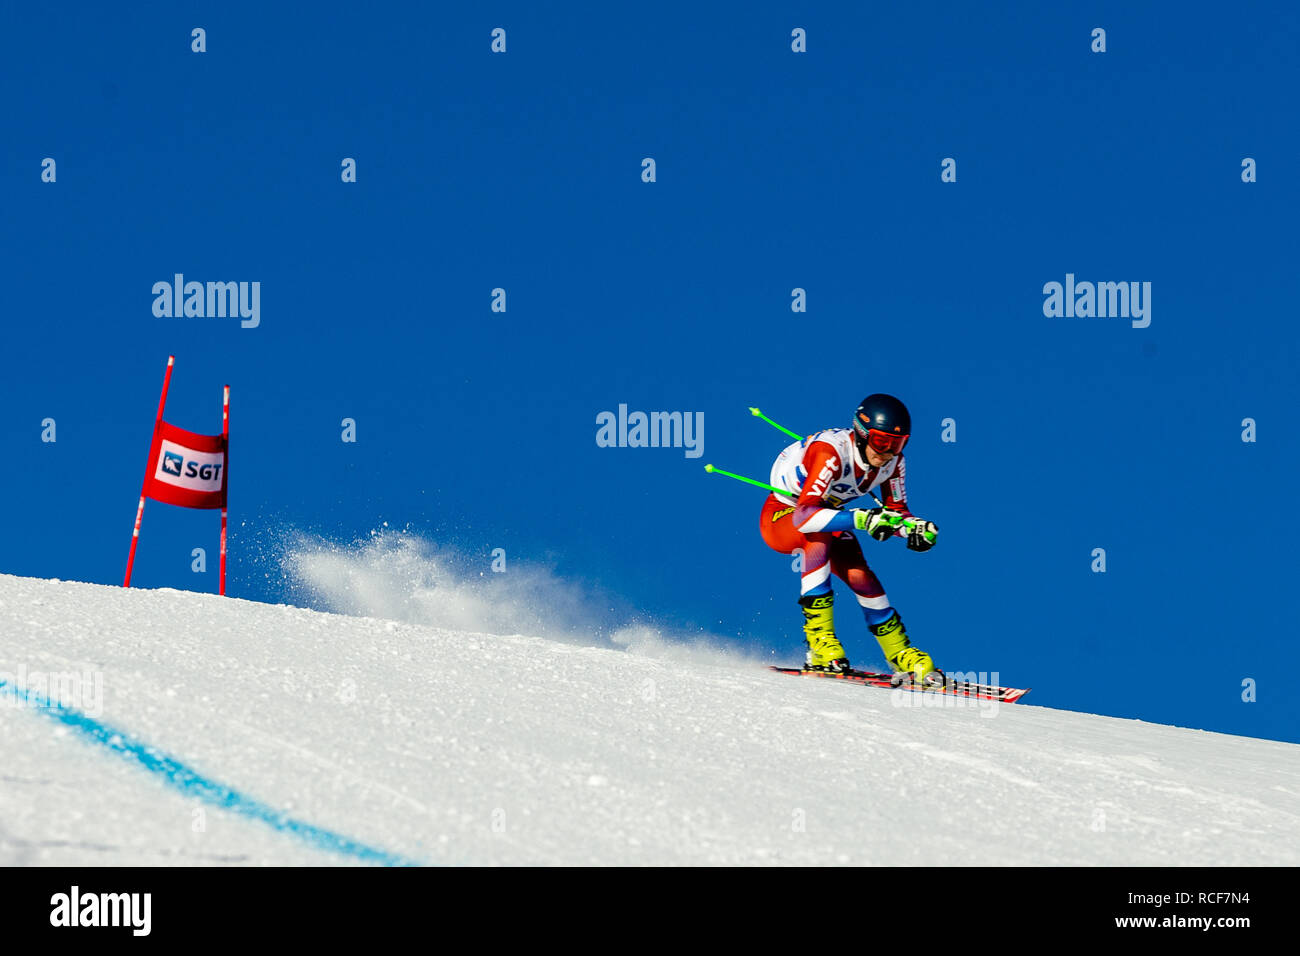 Magnitogorsk, Russia - December 18, 2018: men athlete racer in downhill skiing during National championship alpine skiing Stock Photo